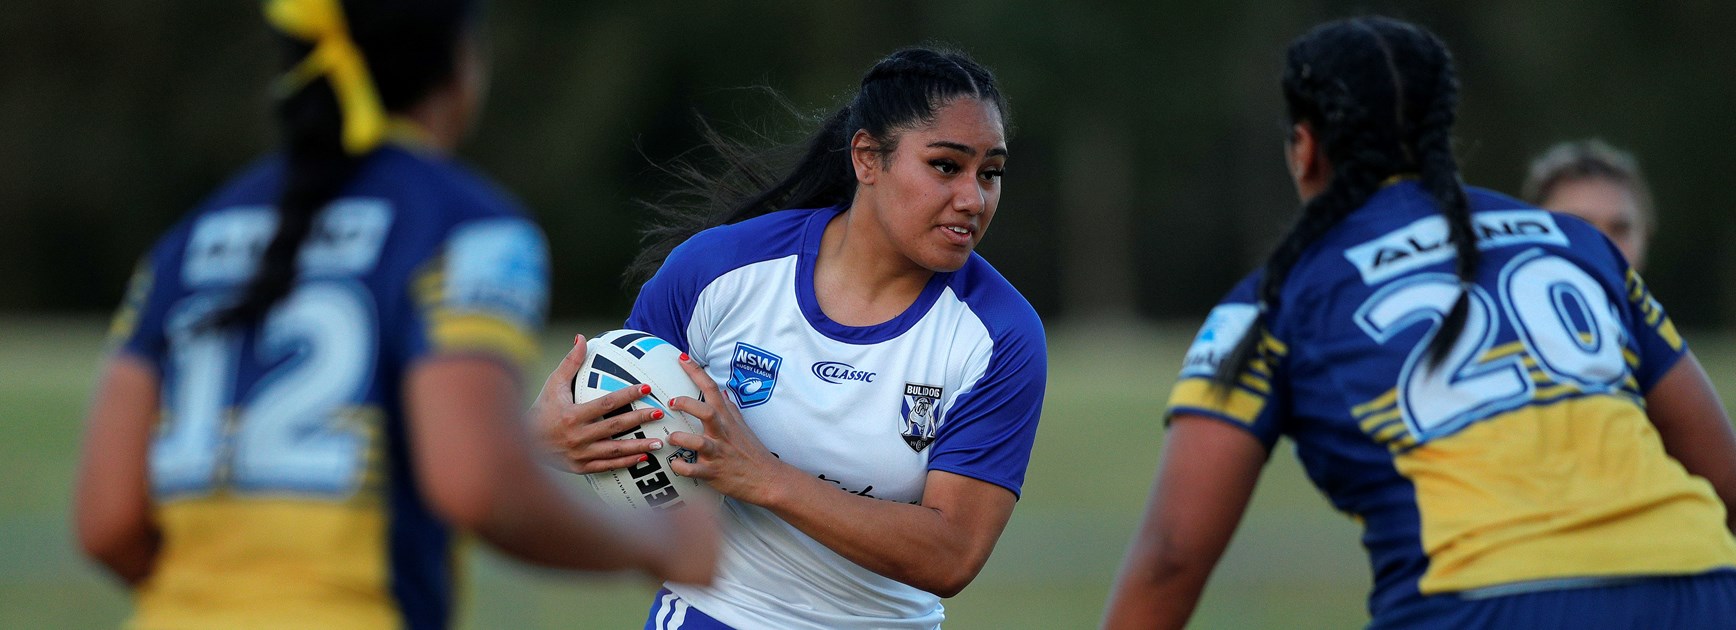 Girl's Rugby League the big mover in Active Kids